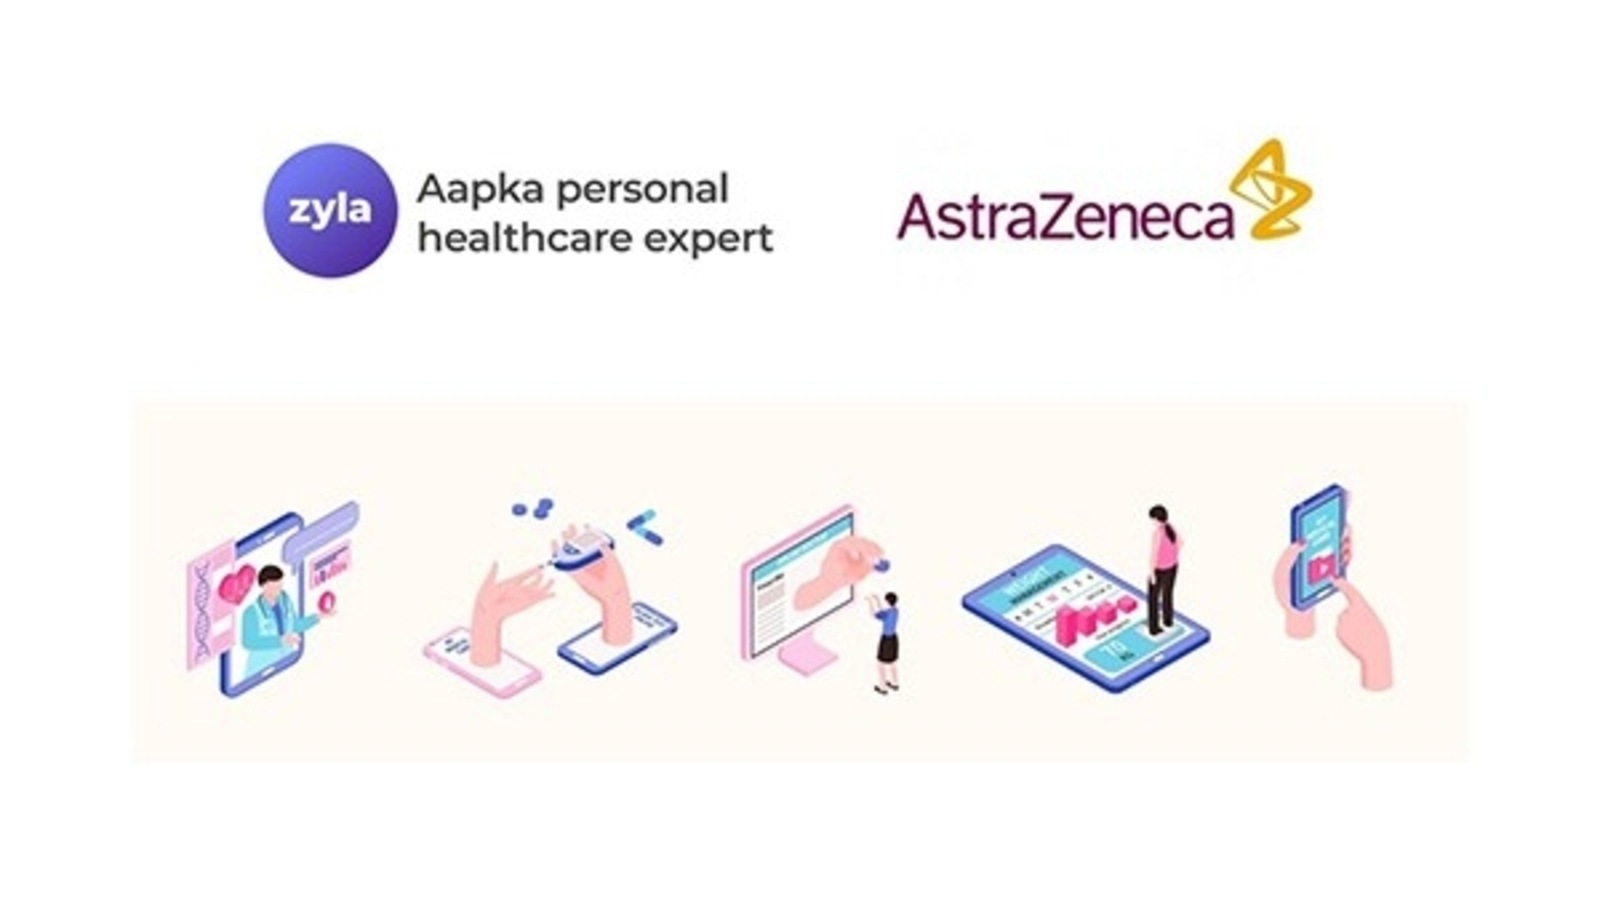 zyla-health-partners-with-astrazeneca-to-enable-1400-virtual-care